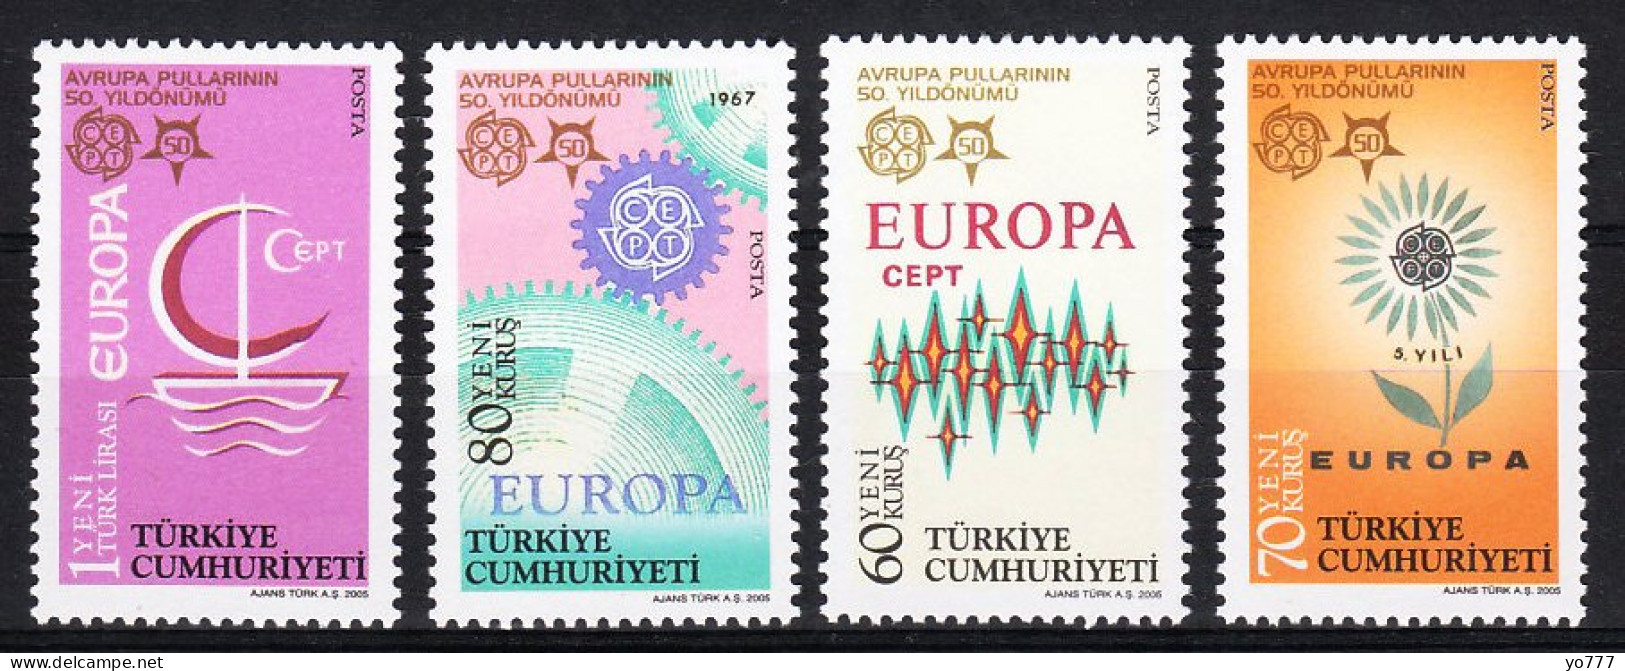 (3487-90) EUROPA (C.E.P.T.) - 50 YEARS OF EUROPA STAMPS SET MNH** - Neufs